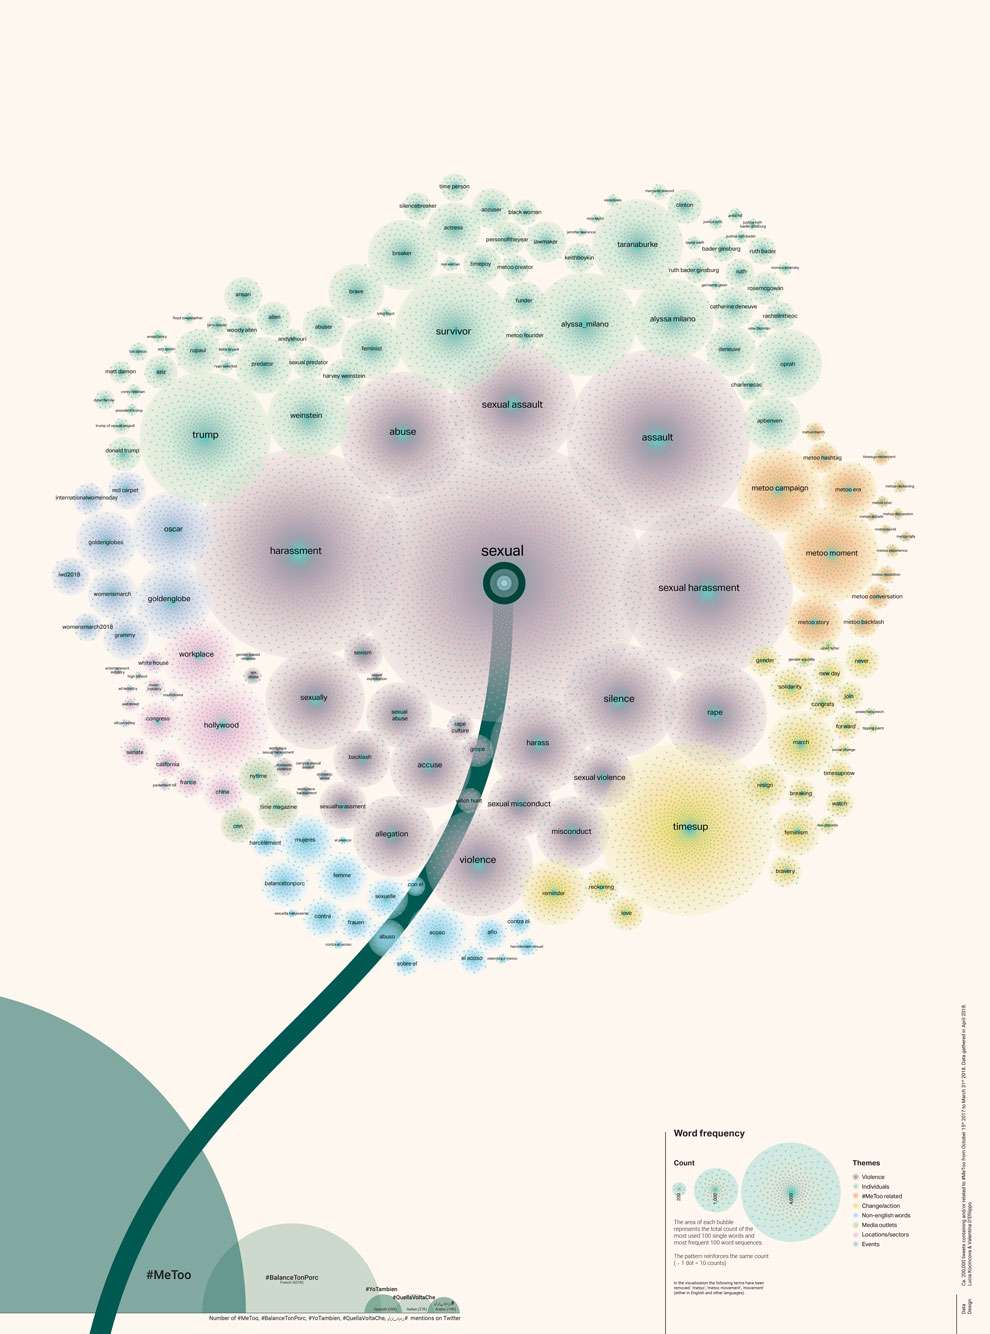 Valentina  D’Efilippo, Infographic data visualisation of a dandelion representing the Metoo movement hashtag on twitter  